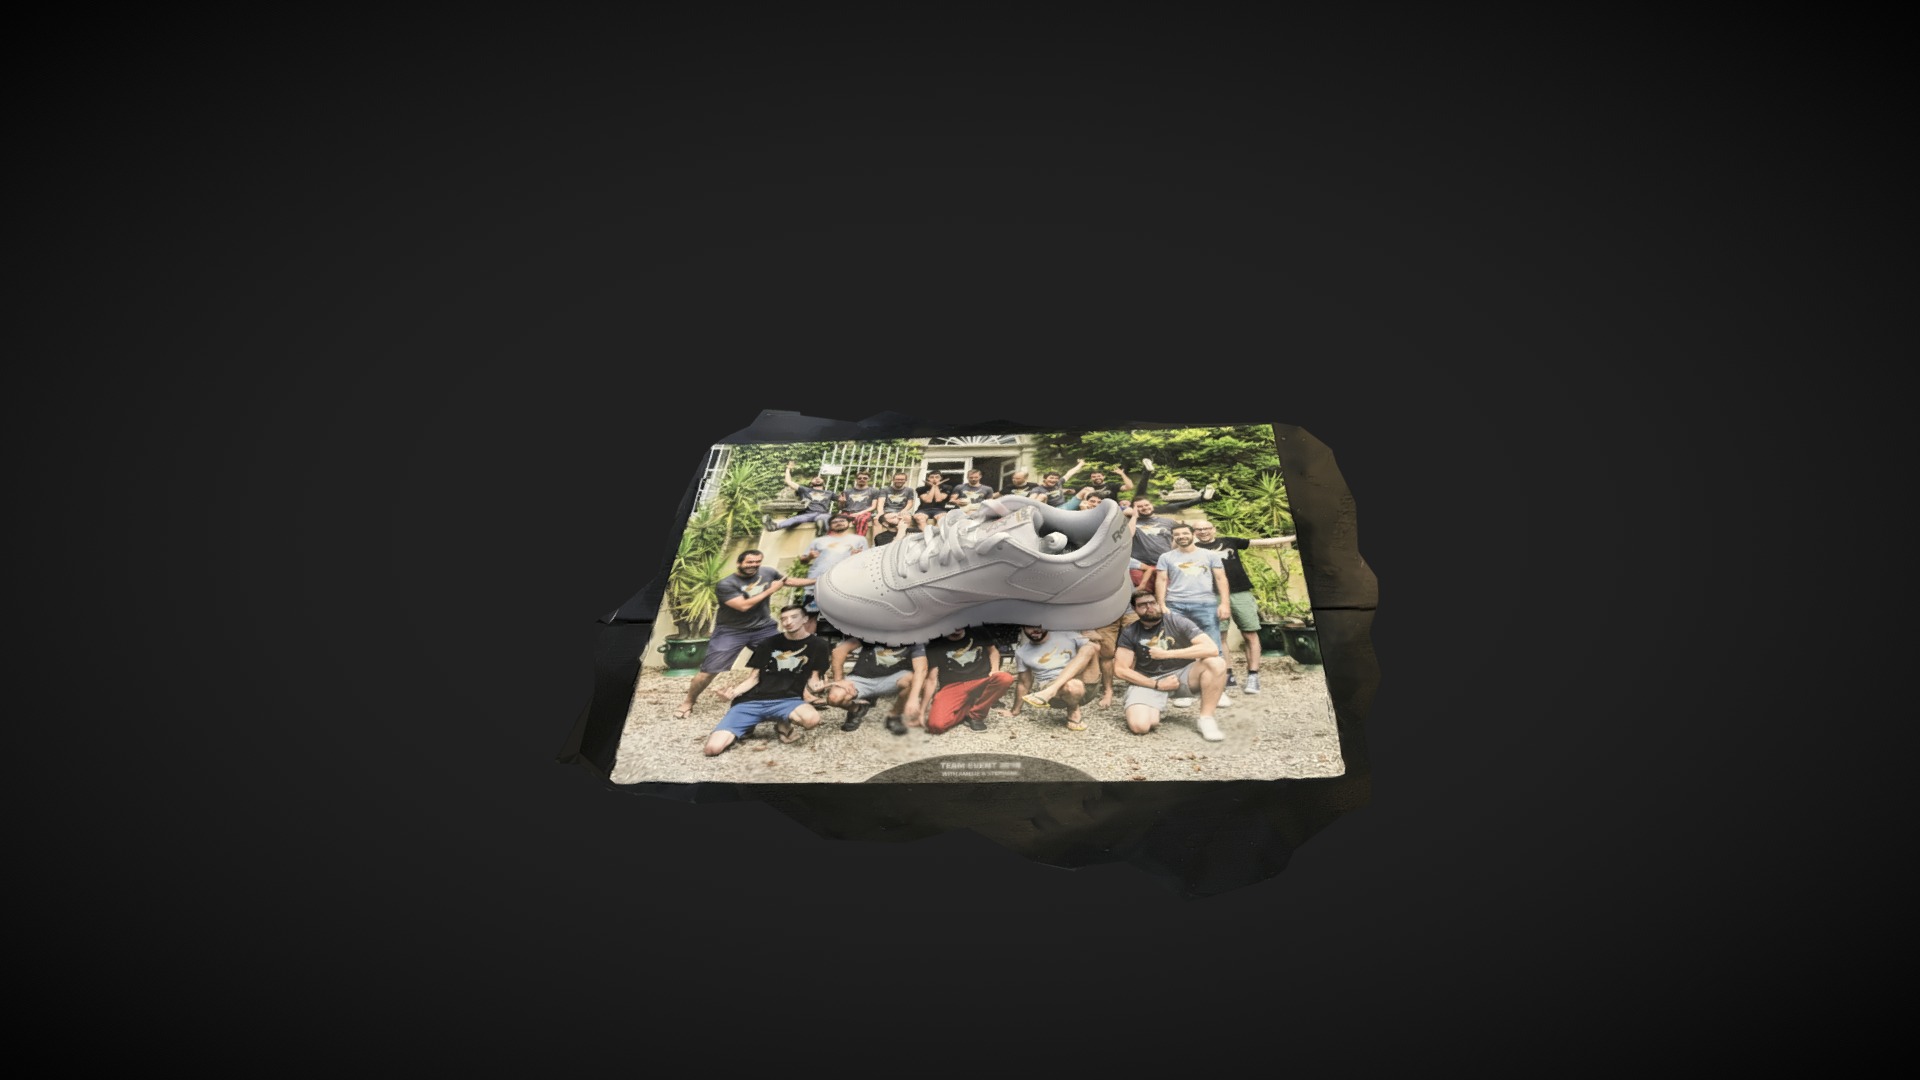 3D model Sketchfab Team & Shoe - This is a 3D model of the Sketchfab Team & Shoe. The 3D model is about a group of people sitting on a bench.